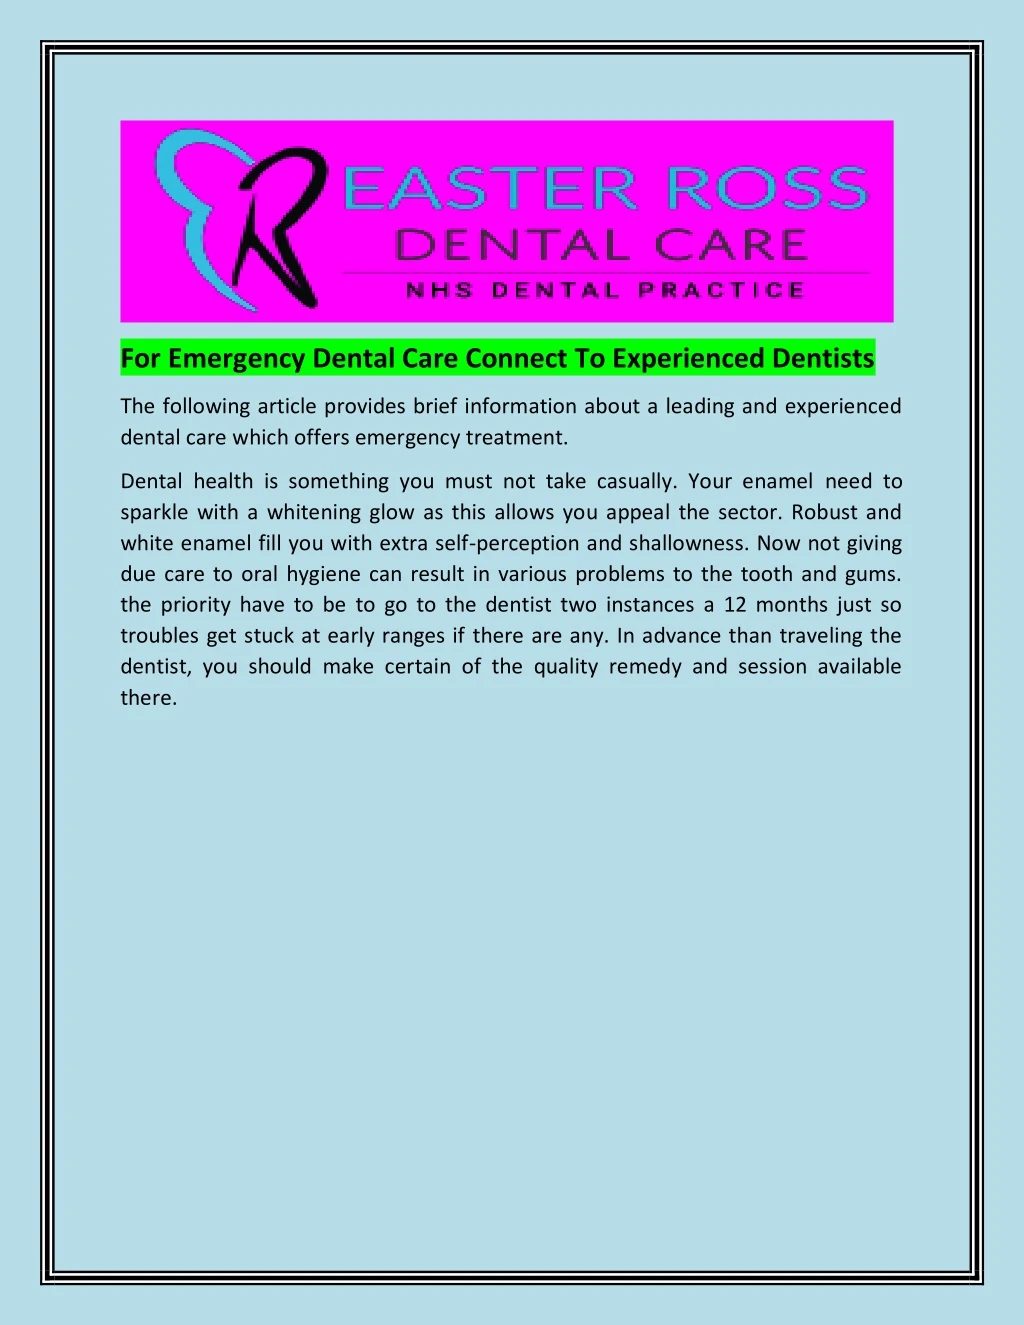 for emergency dental care connect to experienced